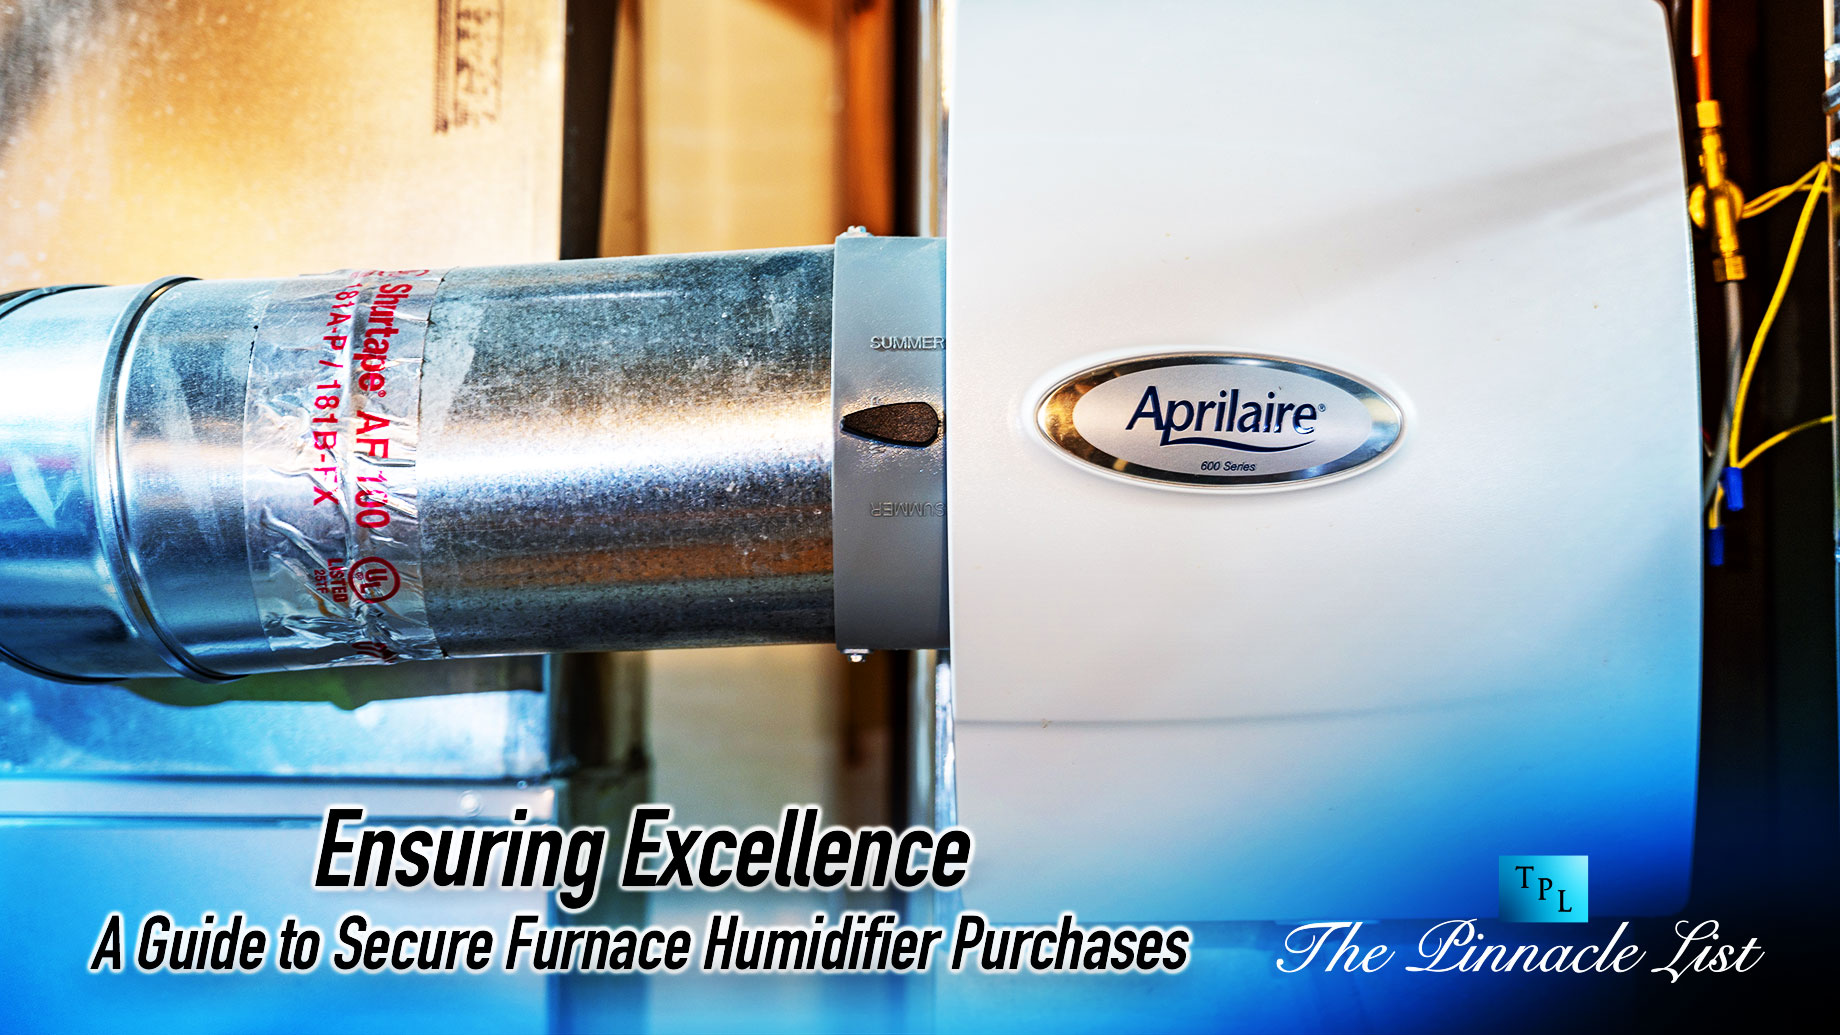 Ensuring Excellence: A Guide to Secure Furnace Humidifier Purchases